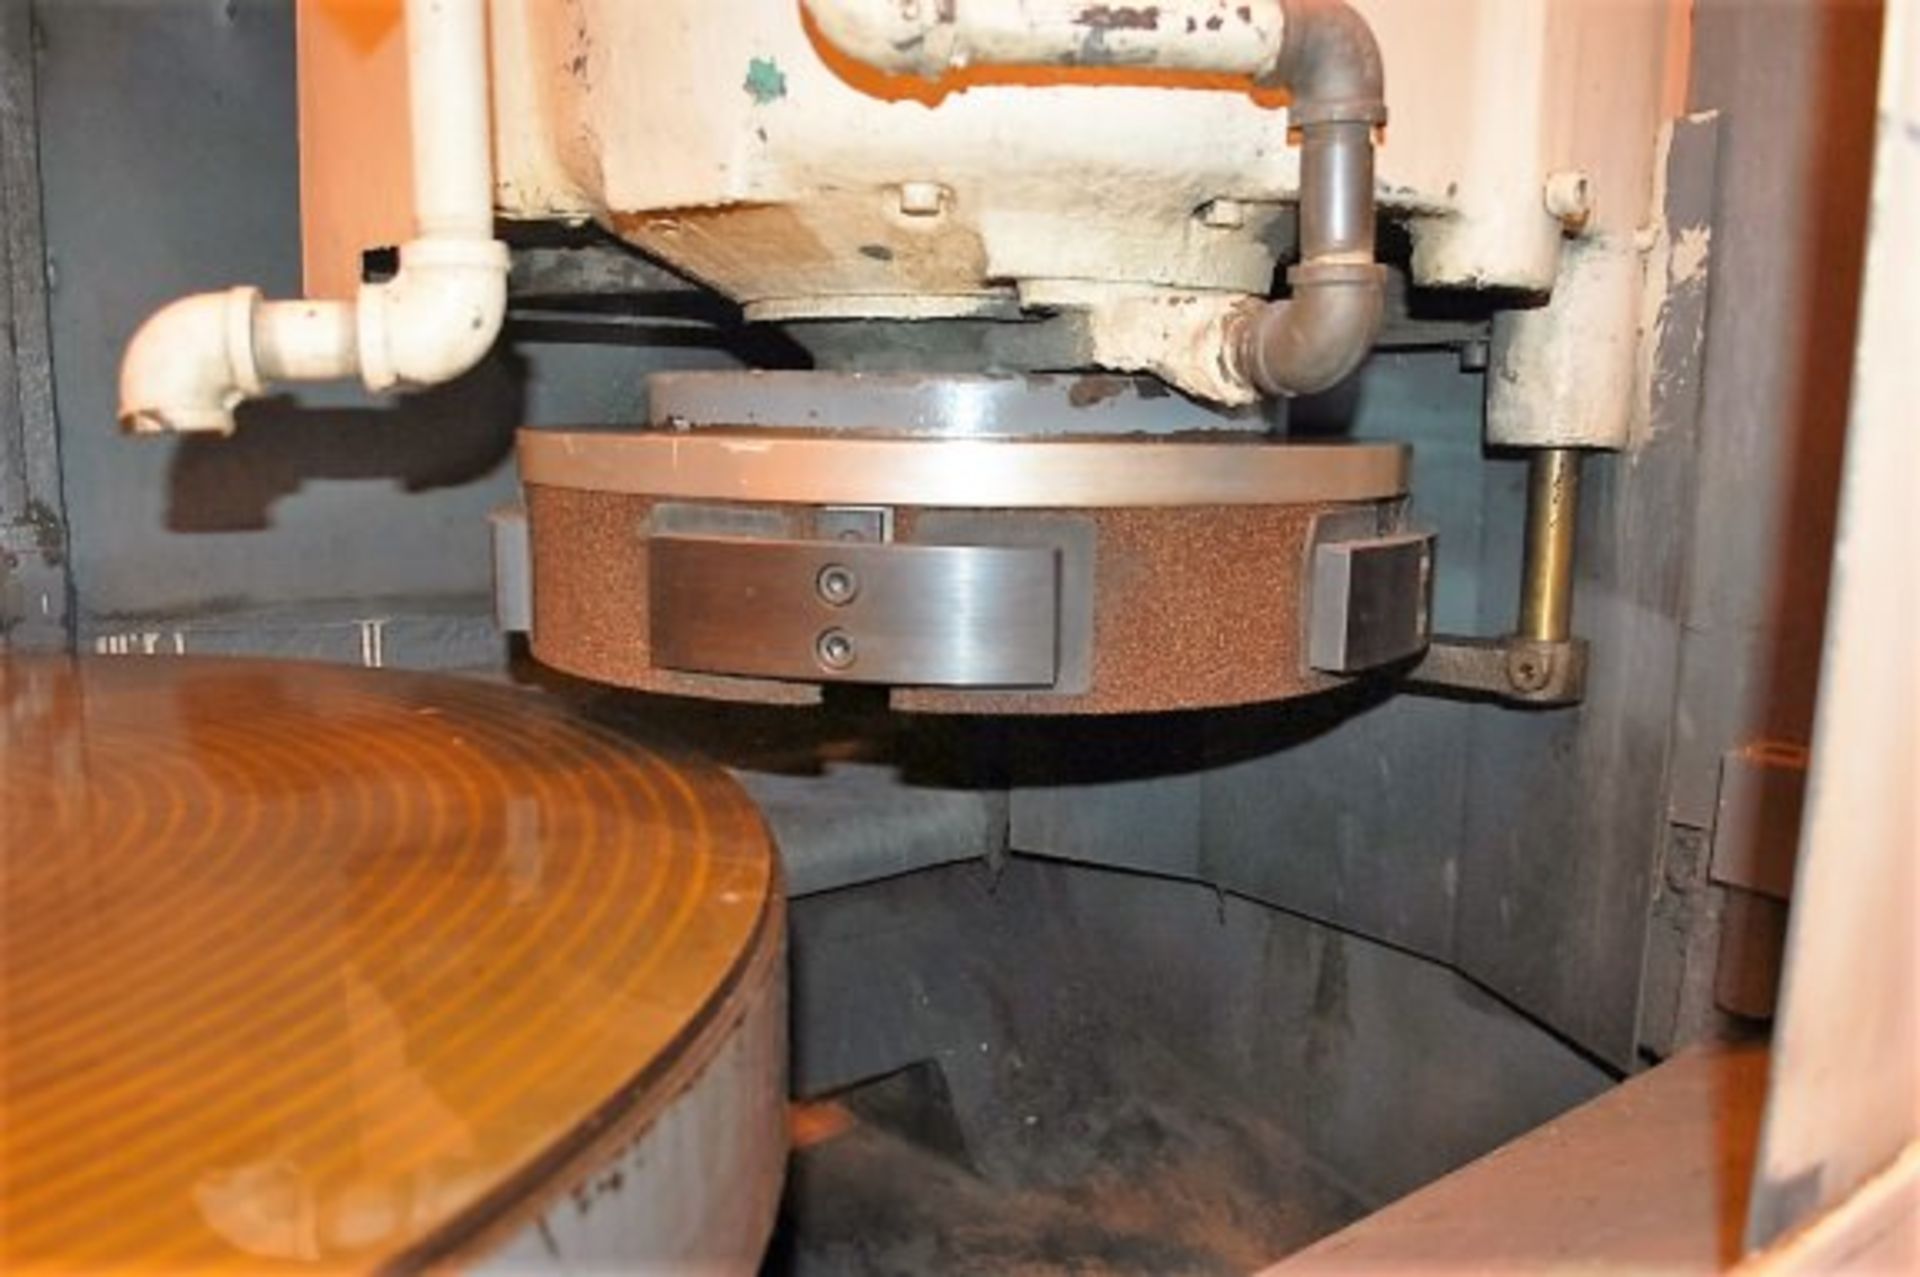 42" BLANCHARD NO. 18D ROTARY SURFACE GRINDER - Image 5 of 10